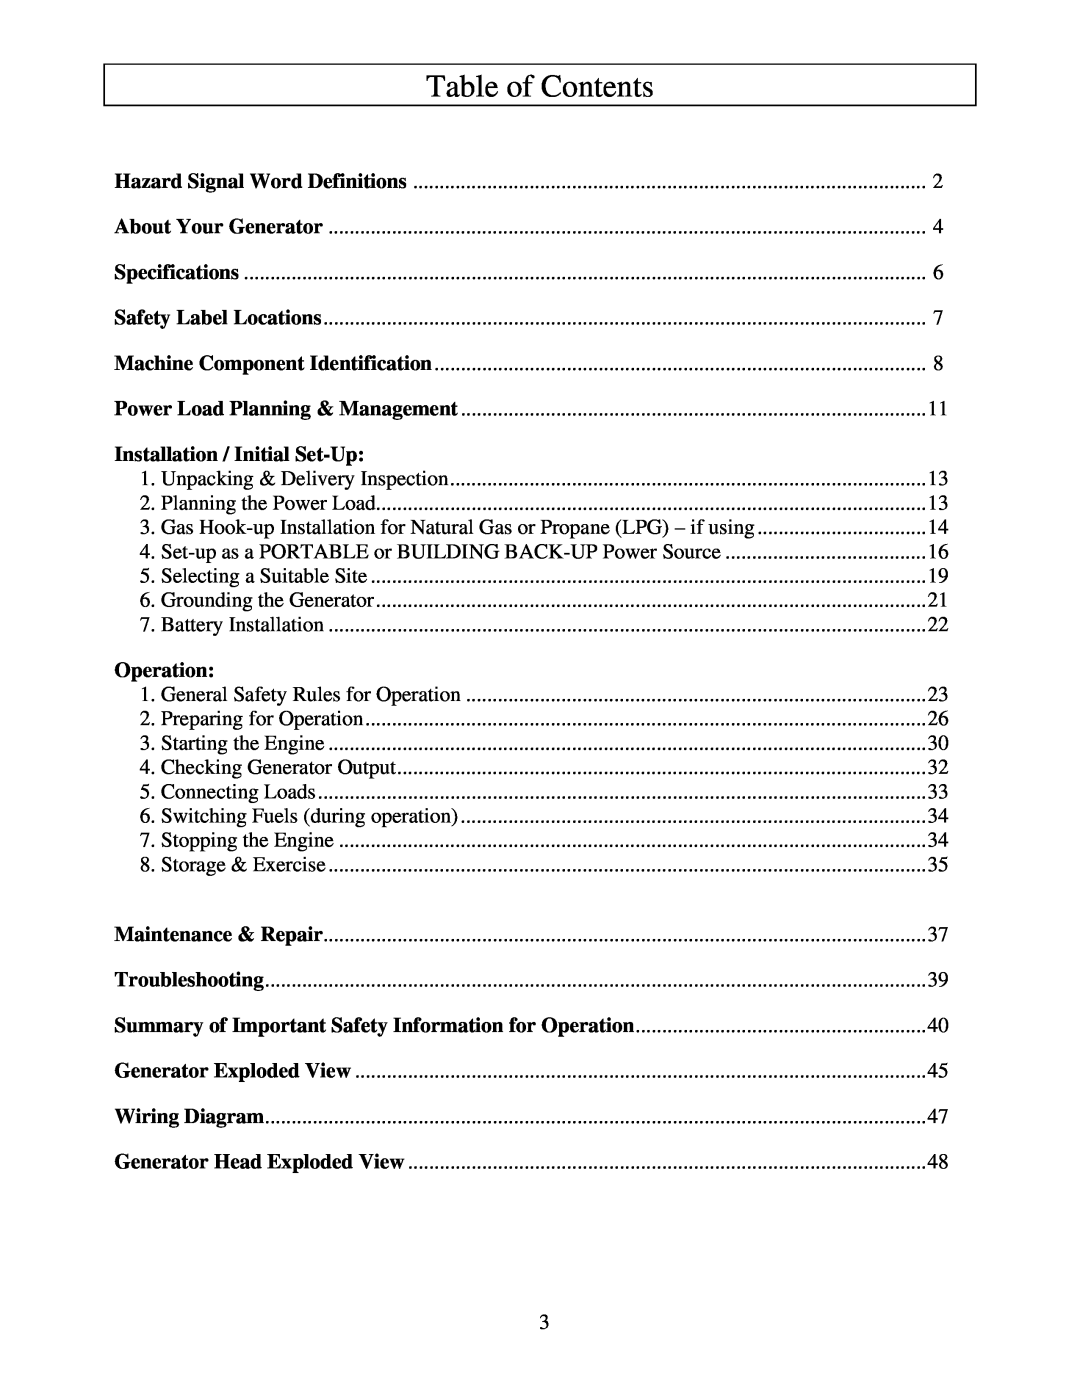 North Star M165938N owner manual Table of Contents, Installation / Initial Set-Up, Operation 